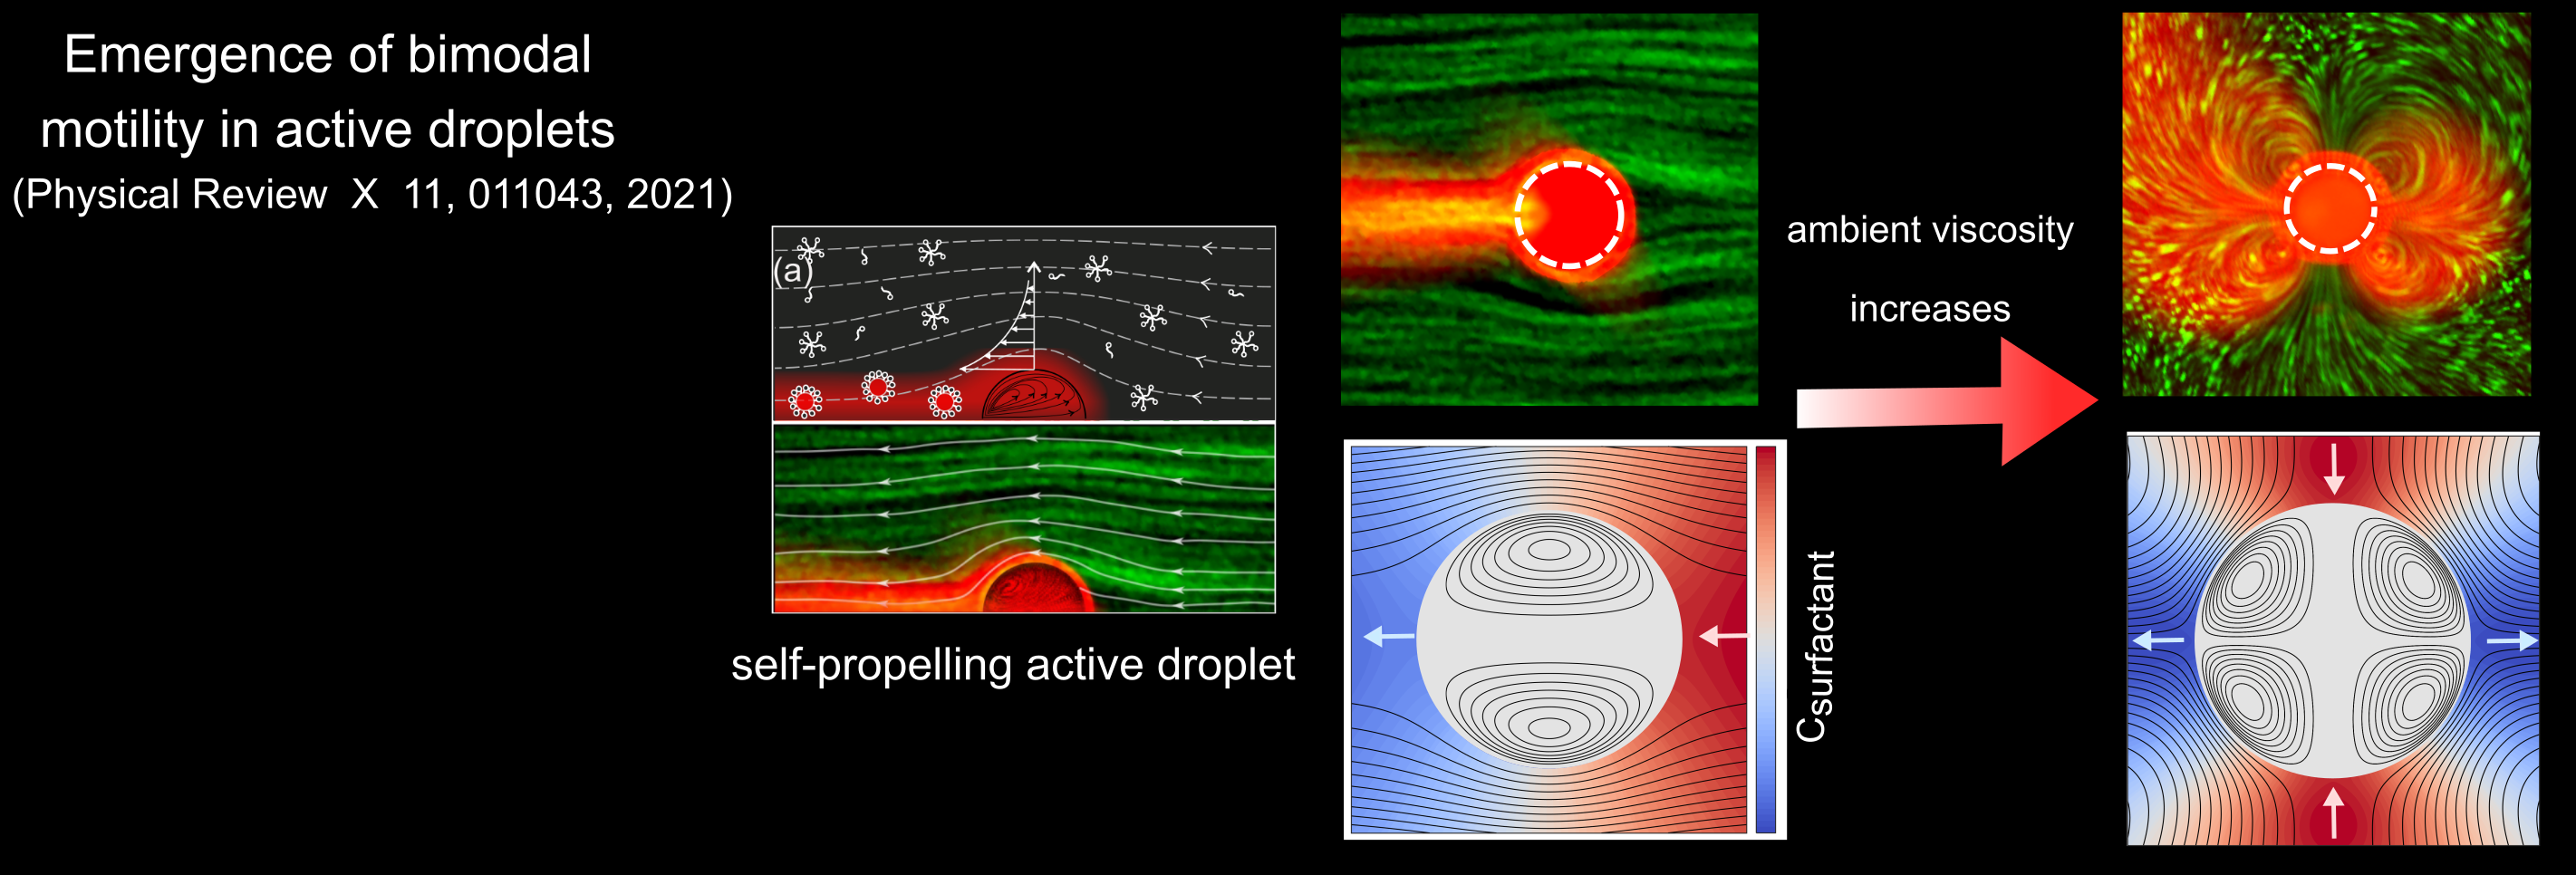 Emergence of bimodal motility in active droplets